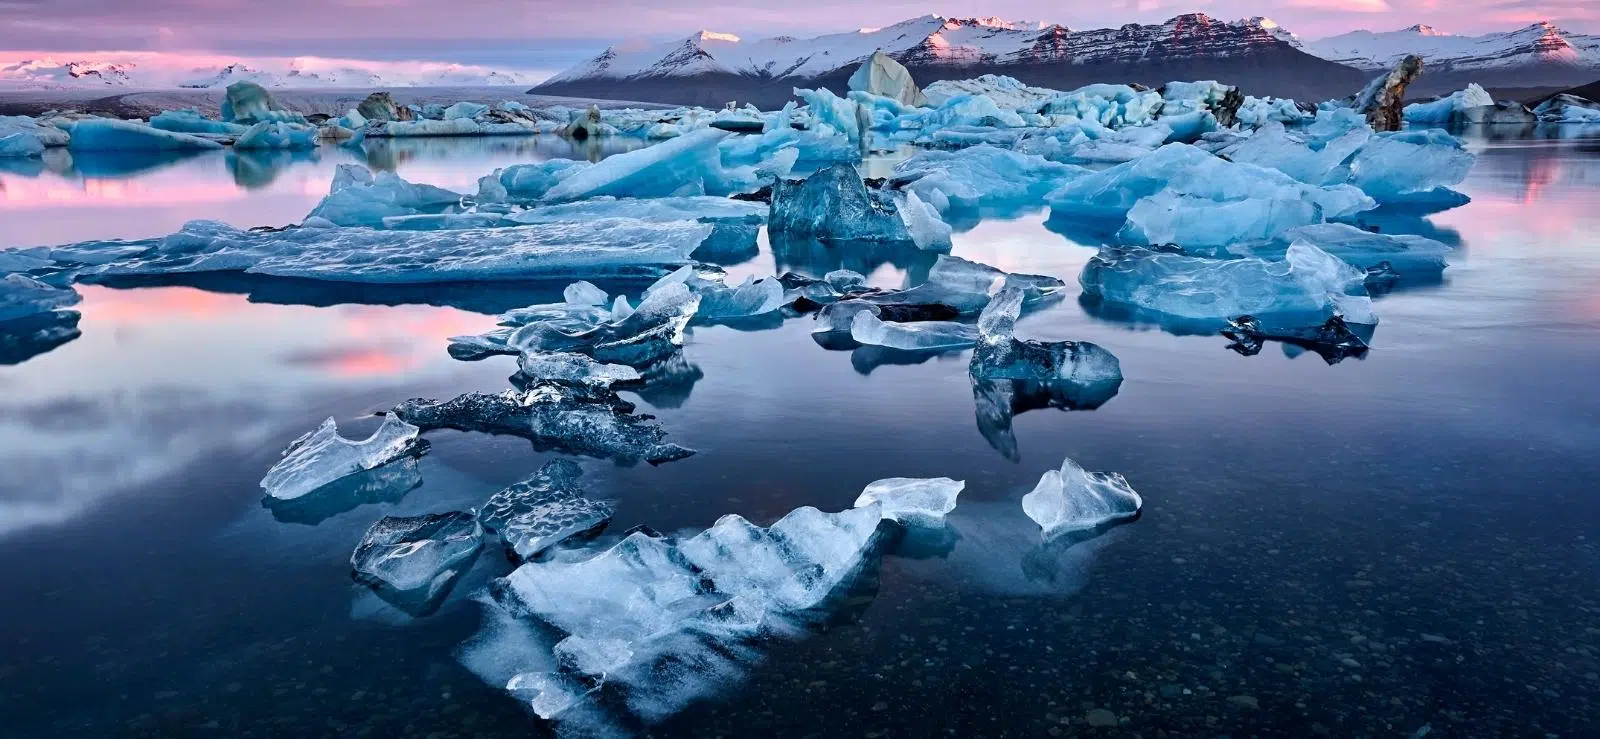 Featured image for “Diamond Beach Iceland: Your Ultimate Guide 2022”